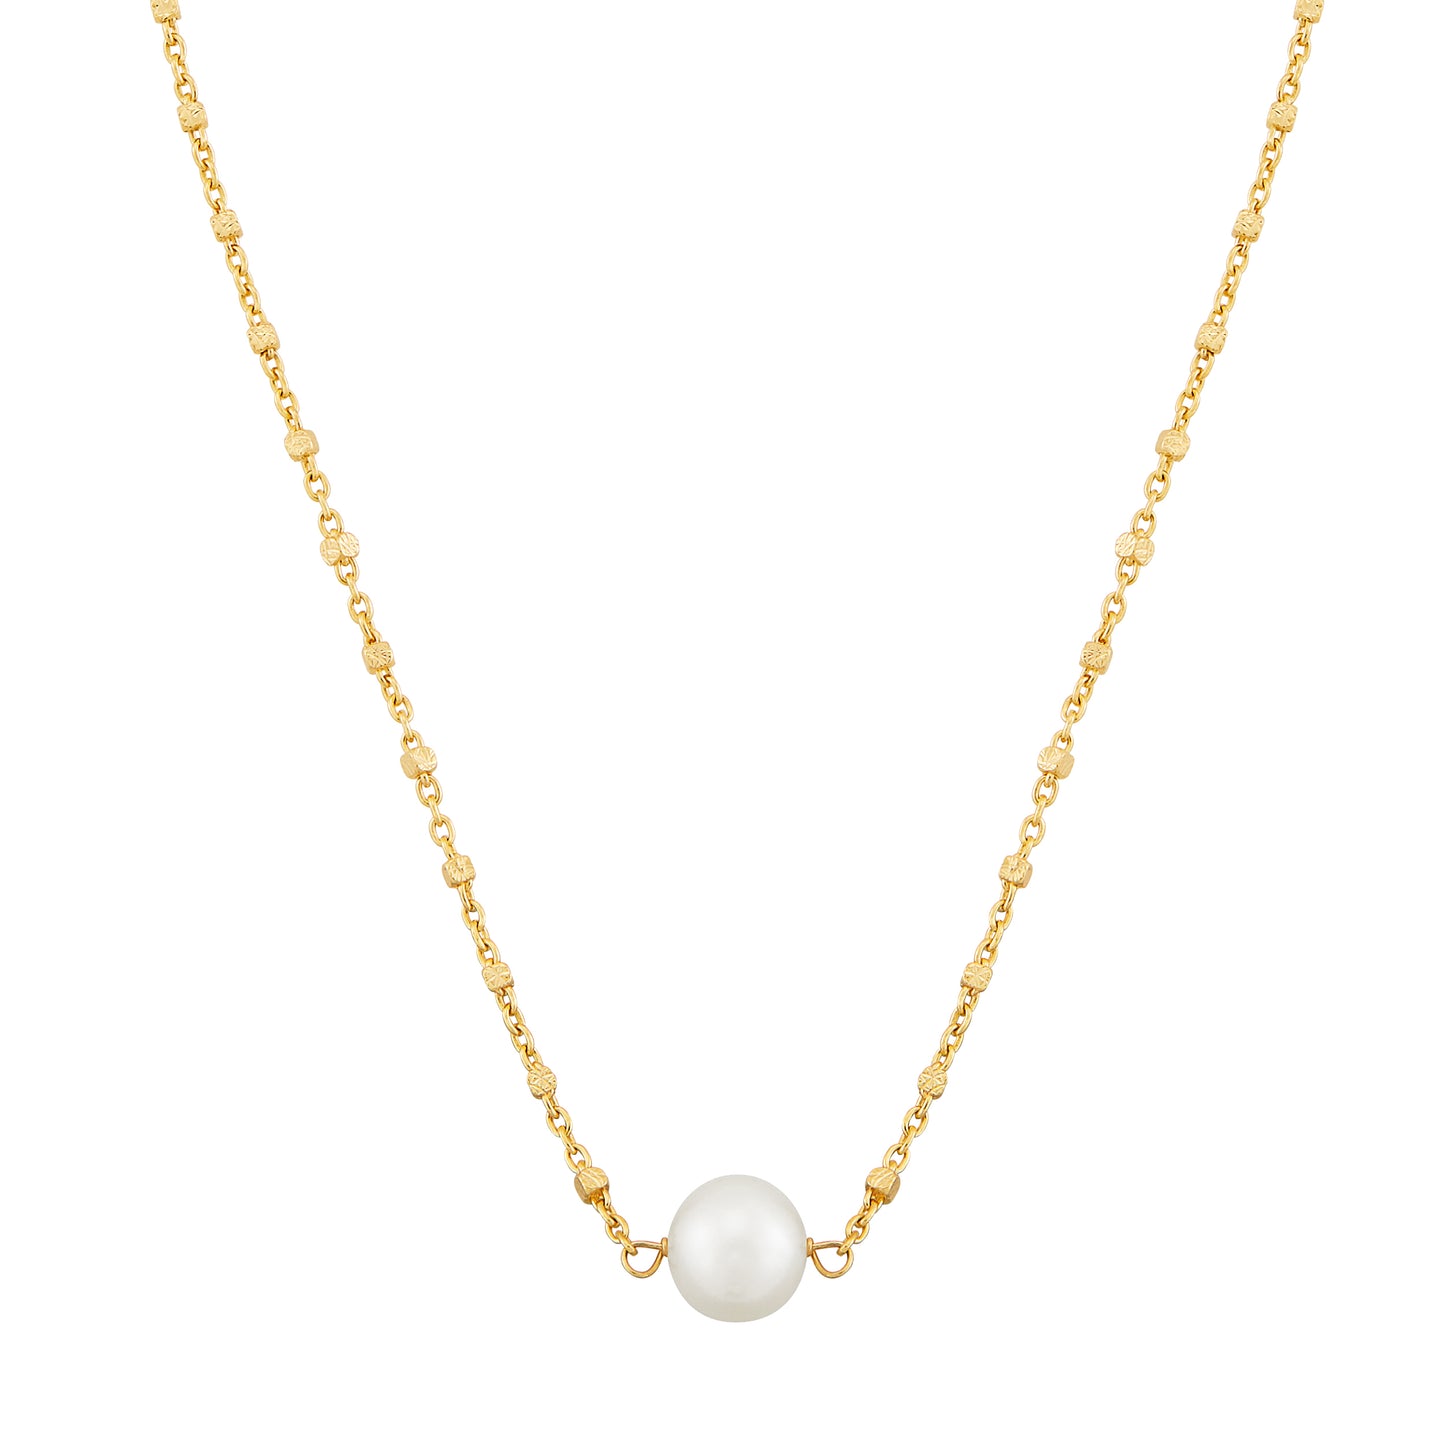 Honora 14kt Yellow Gold Solitaire Pearl Necklace